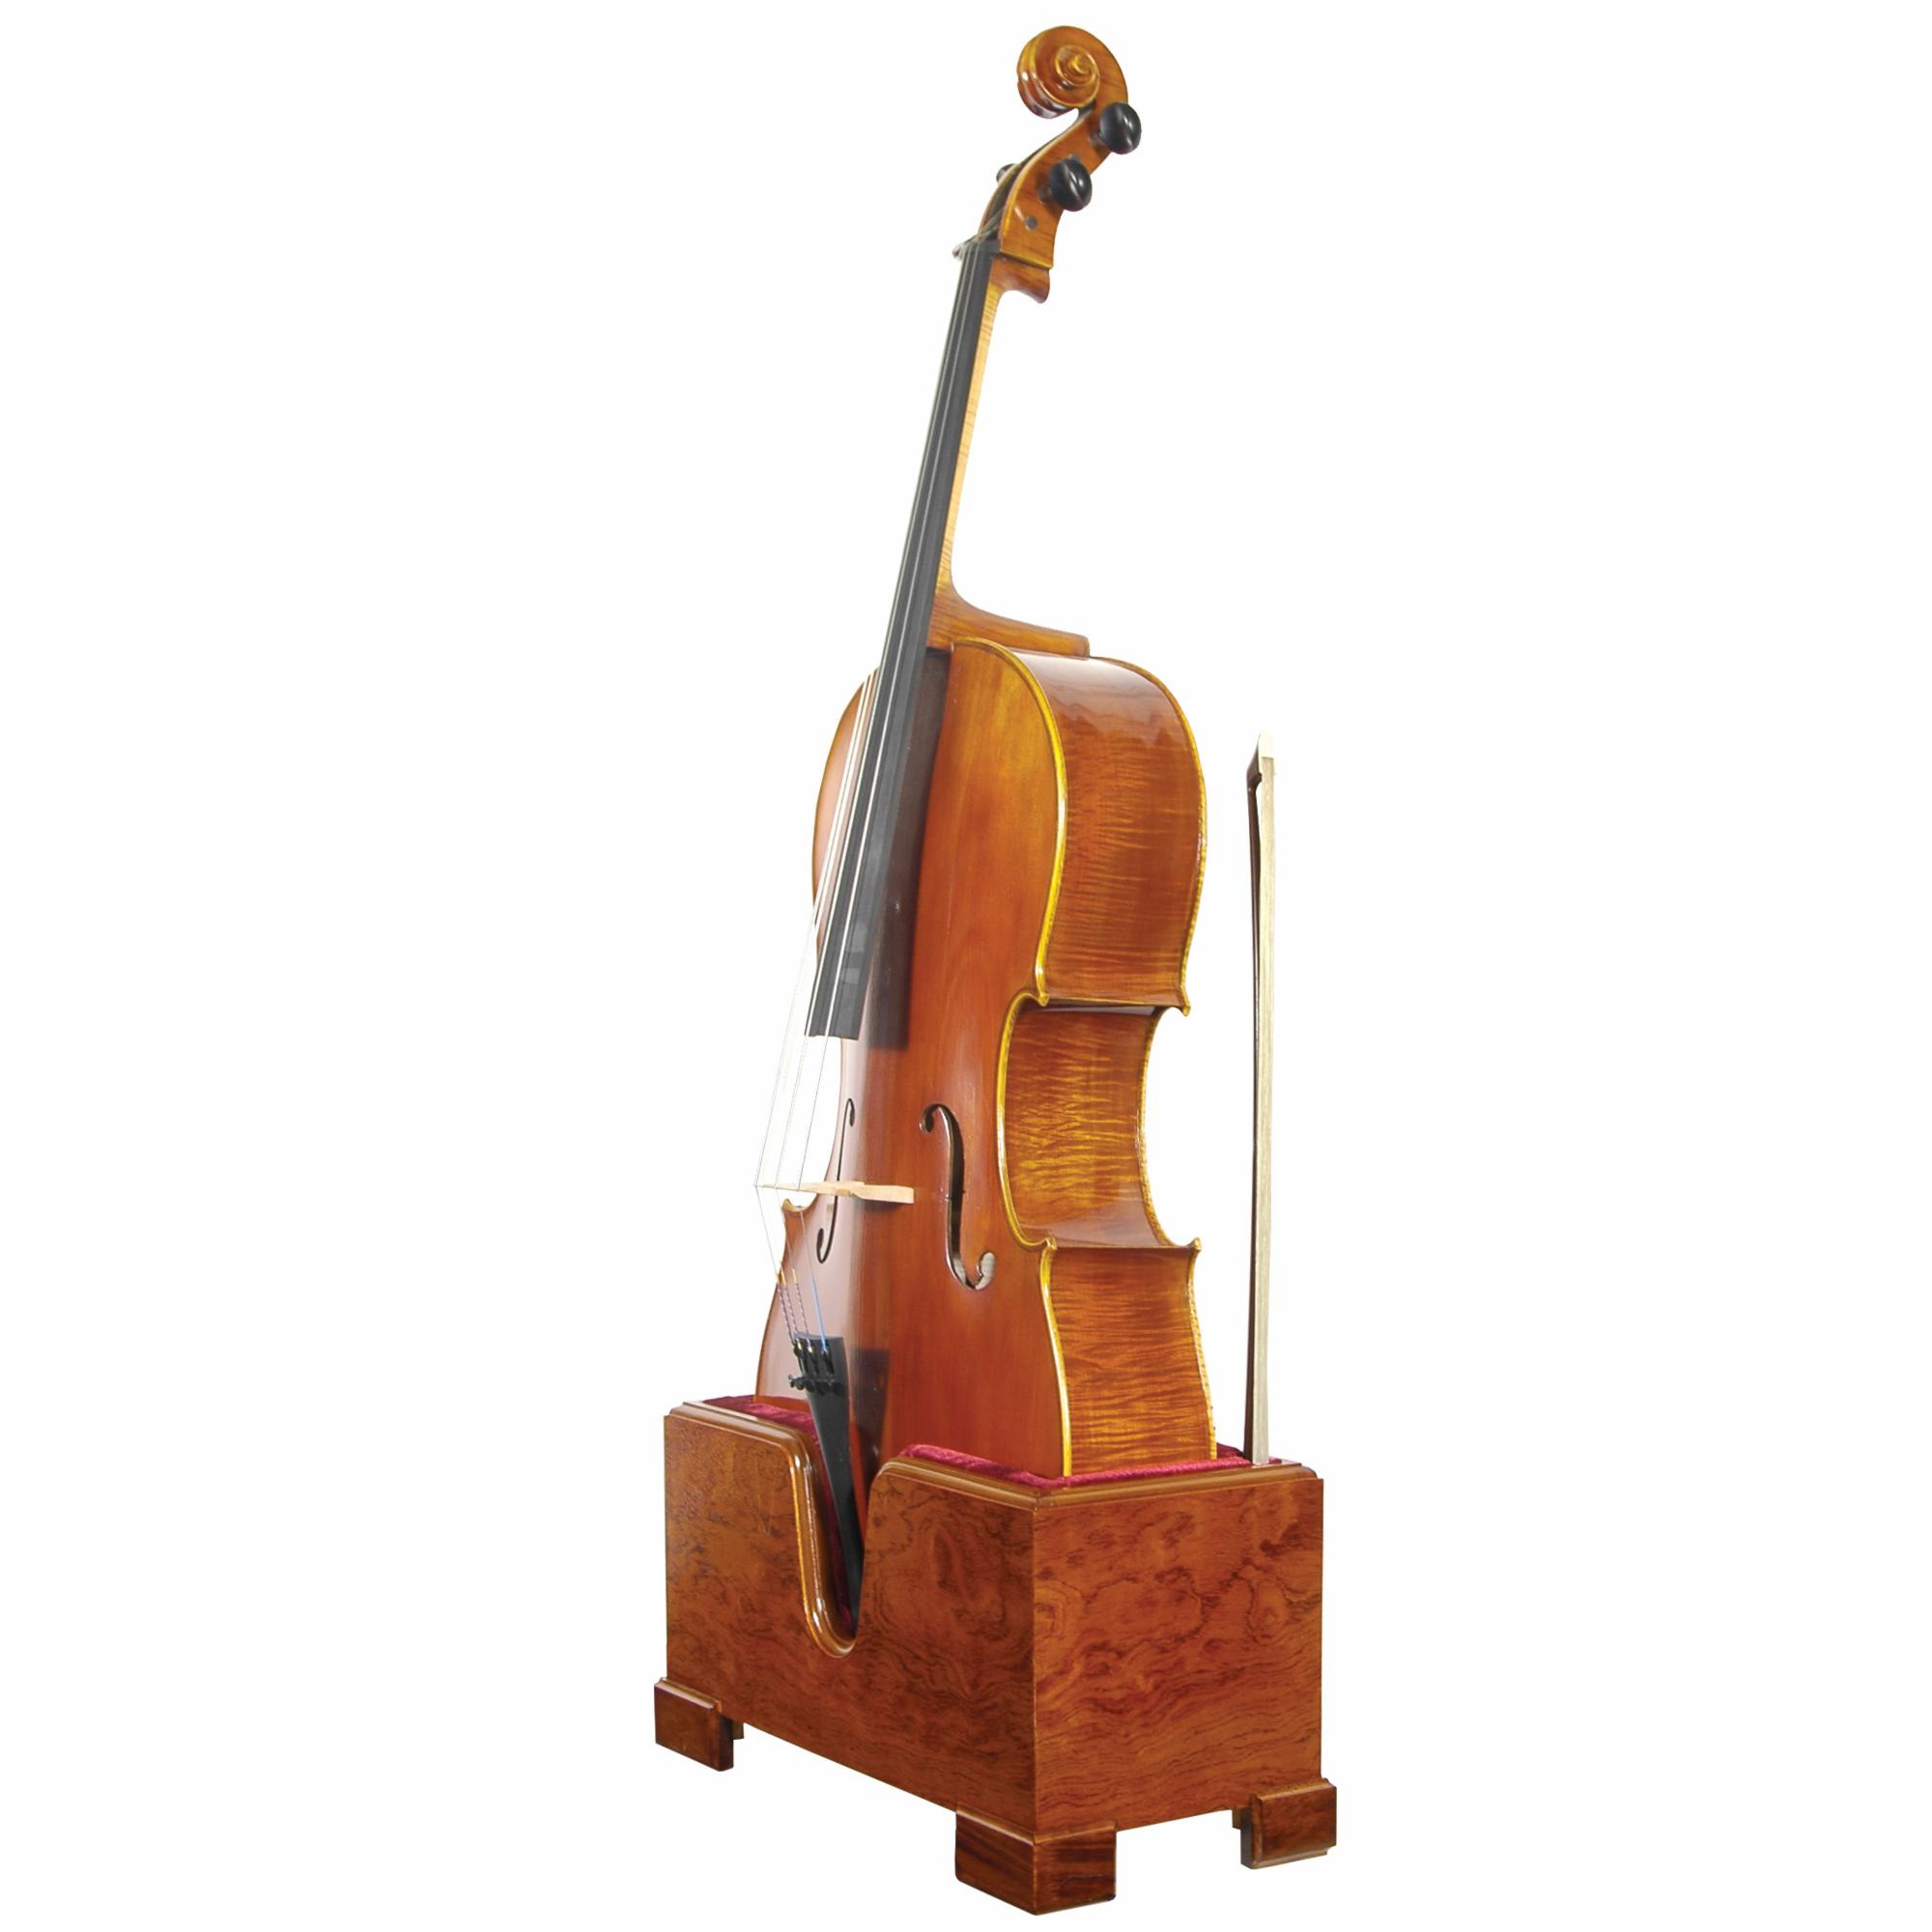 Southwest Strings Cello Cradle Instrument Stand